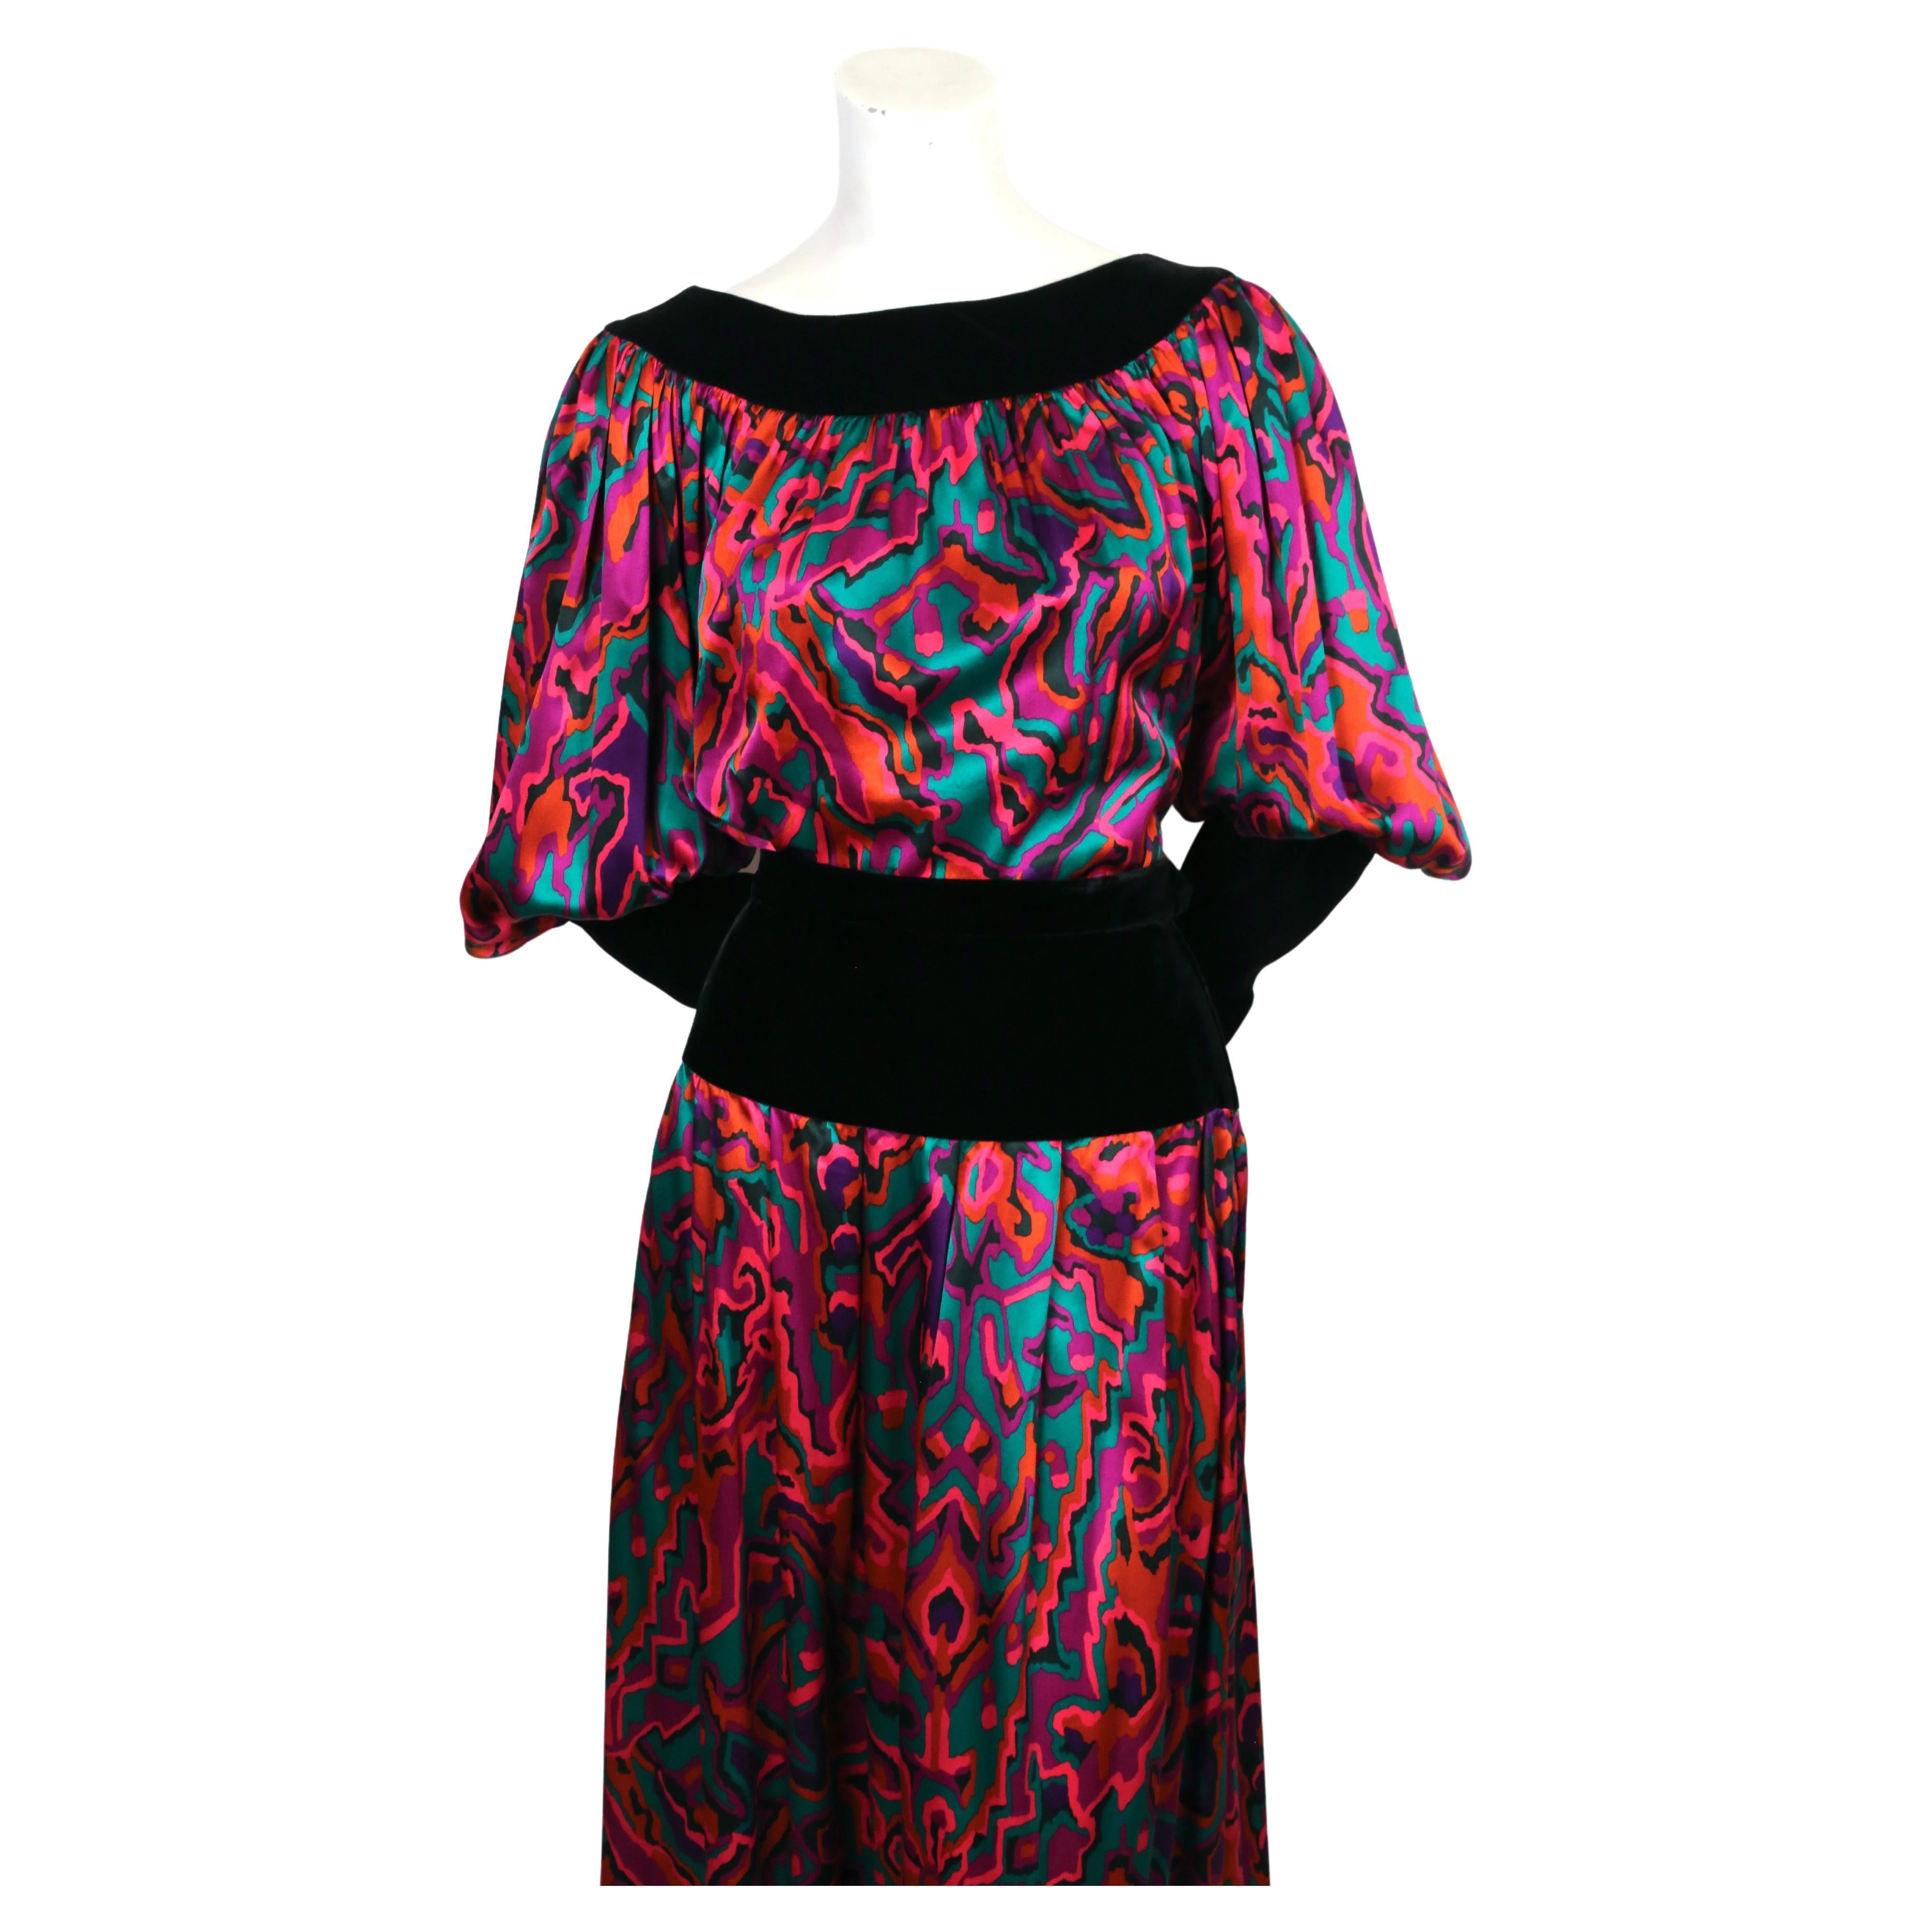 Abstract printed silk top and matching skirt trimmed in black velvet from Yves Saint Laurent dating to fall of 1982 exactly as seen on the runway. Also great worn as separates. Top is labeled a FR 40 and skirt is unlabeled. Approximate measurements